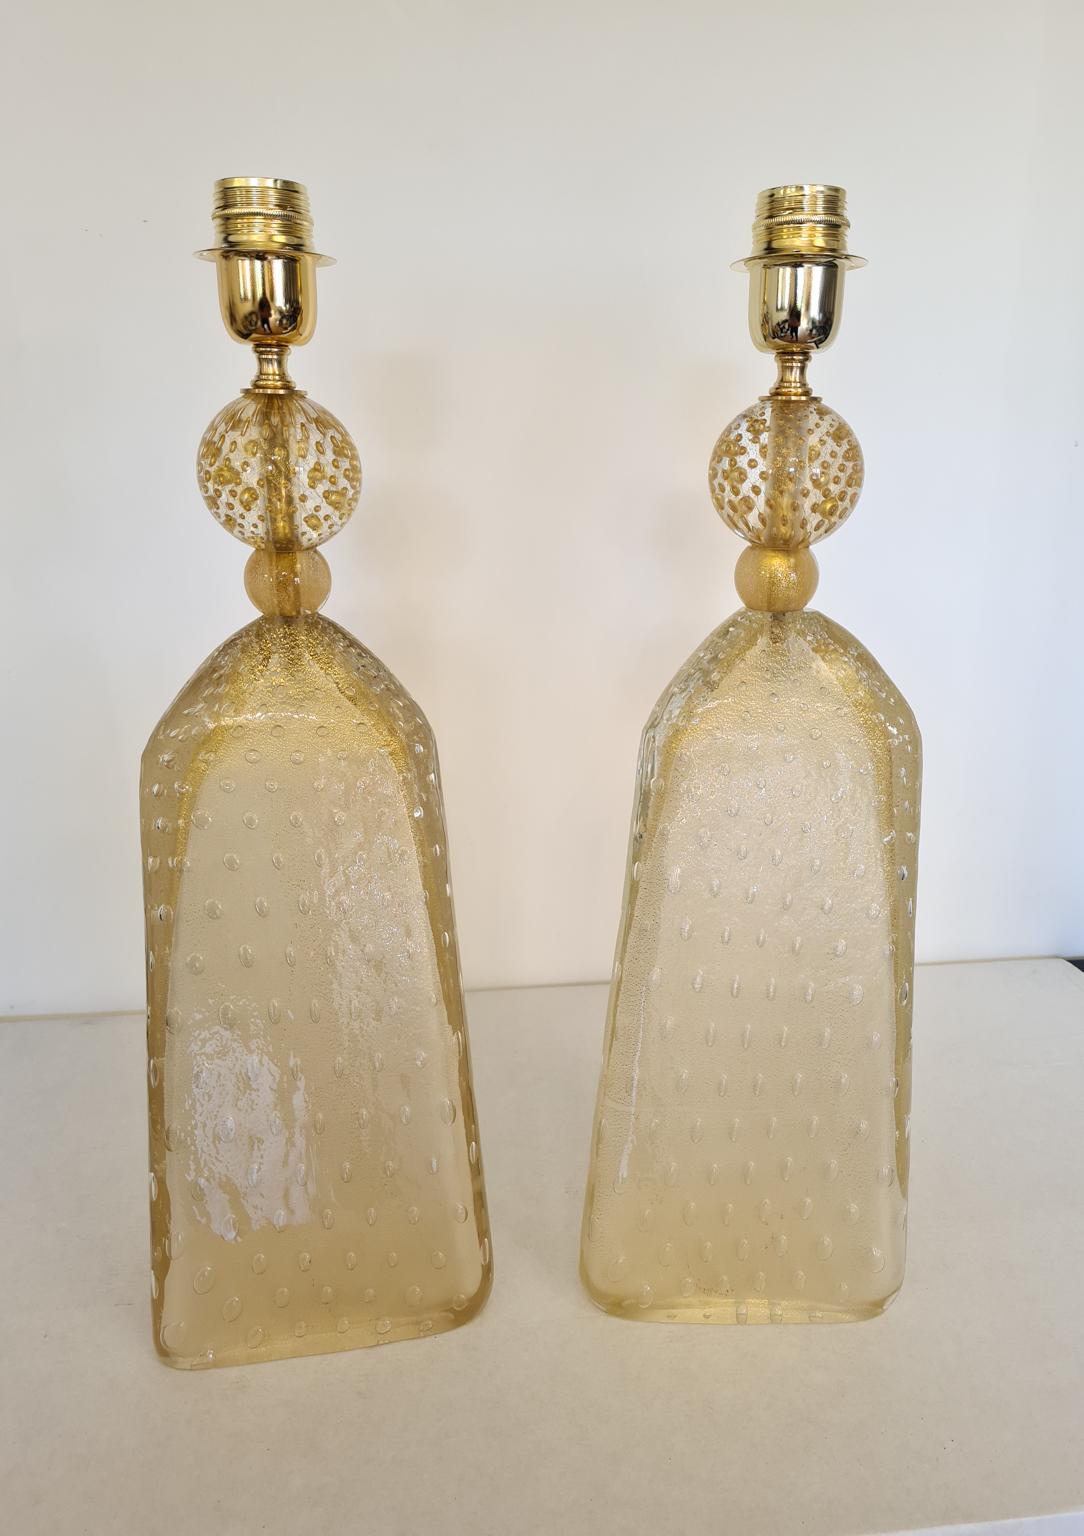 Exclusive pair of Murano glass table lamps in sandblasted gold crystal color.
The lamps have a process called Balloton that is submerged glass bubbles.
Triangular lamps with golden sphere.
The products are entirely handmade in the Mid-Century